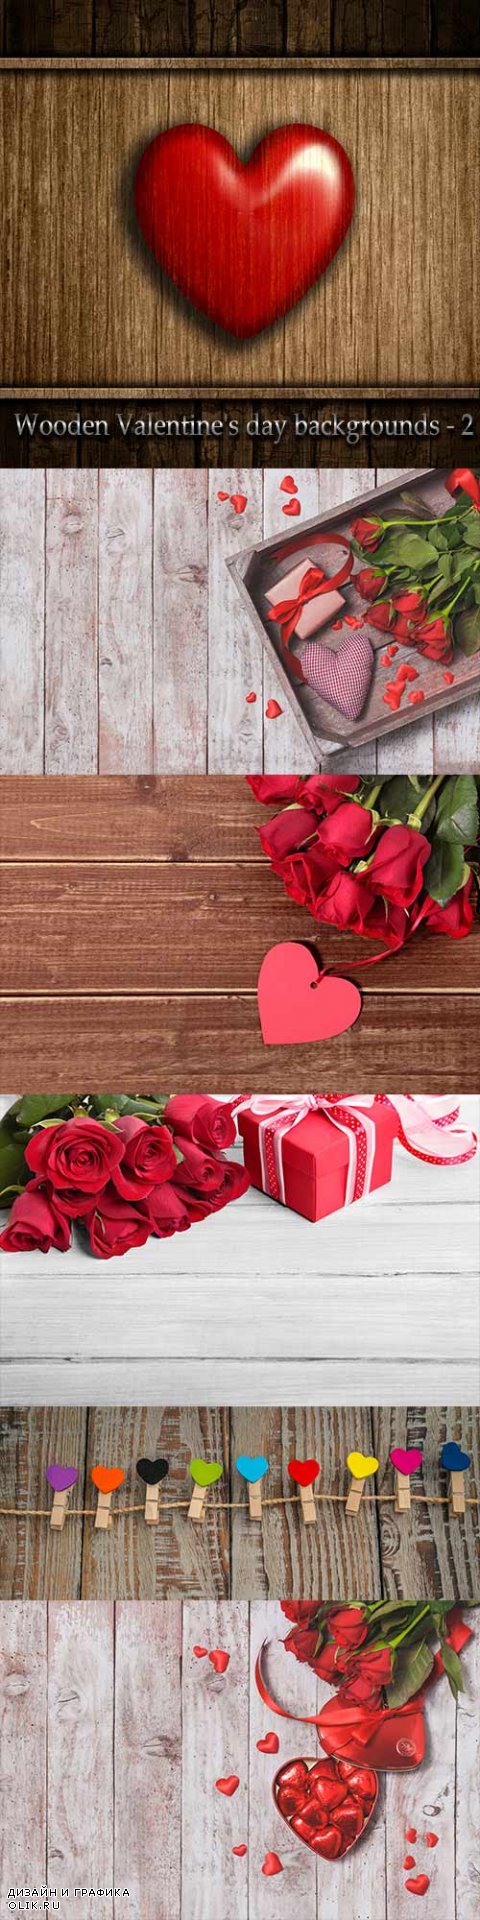 Wooden Valentine's day backgrounds - 2